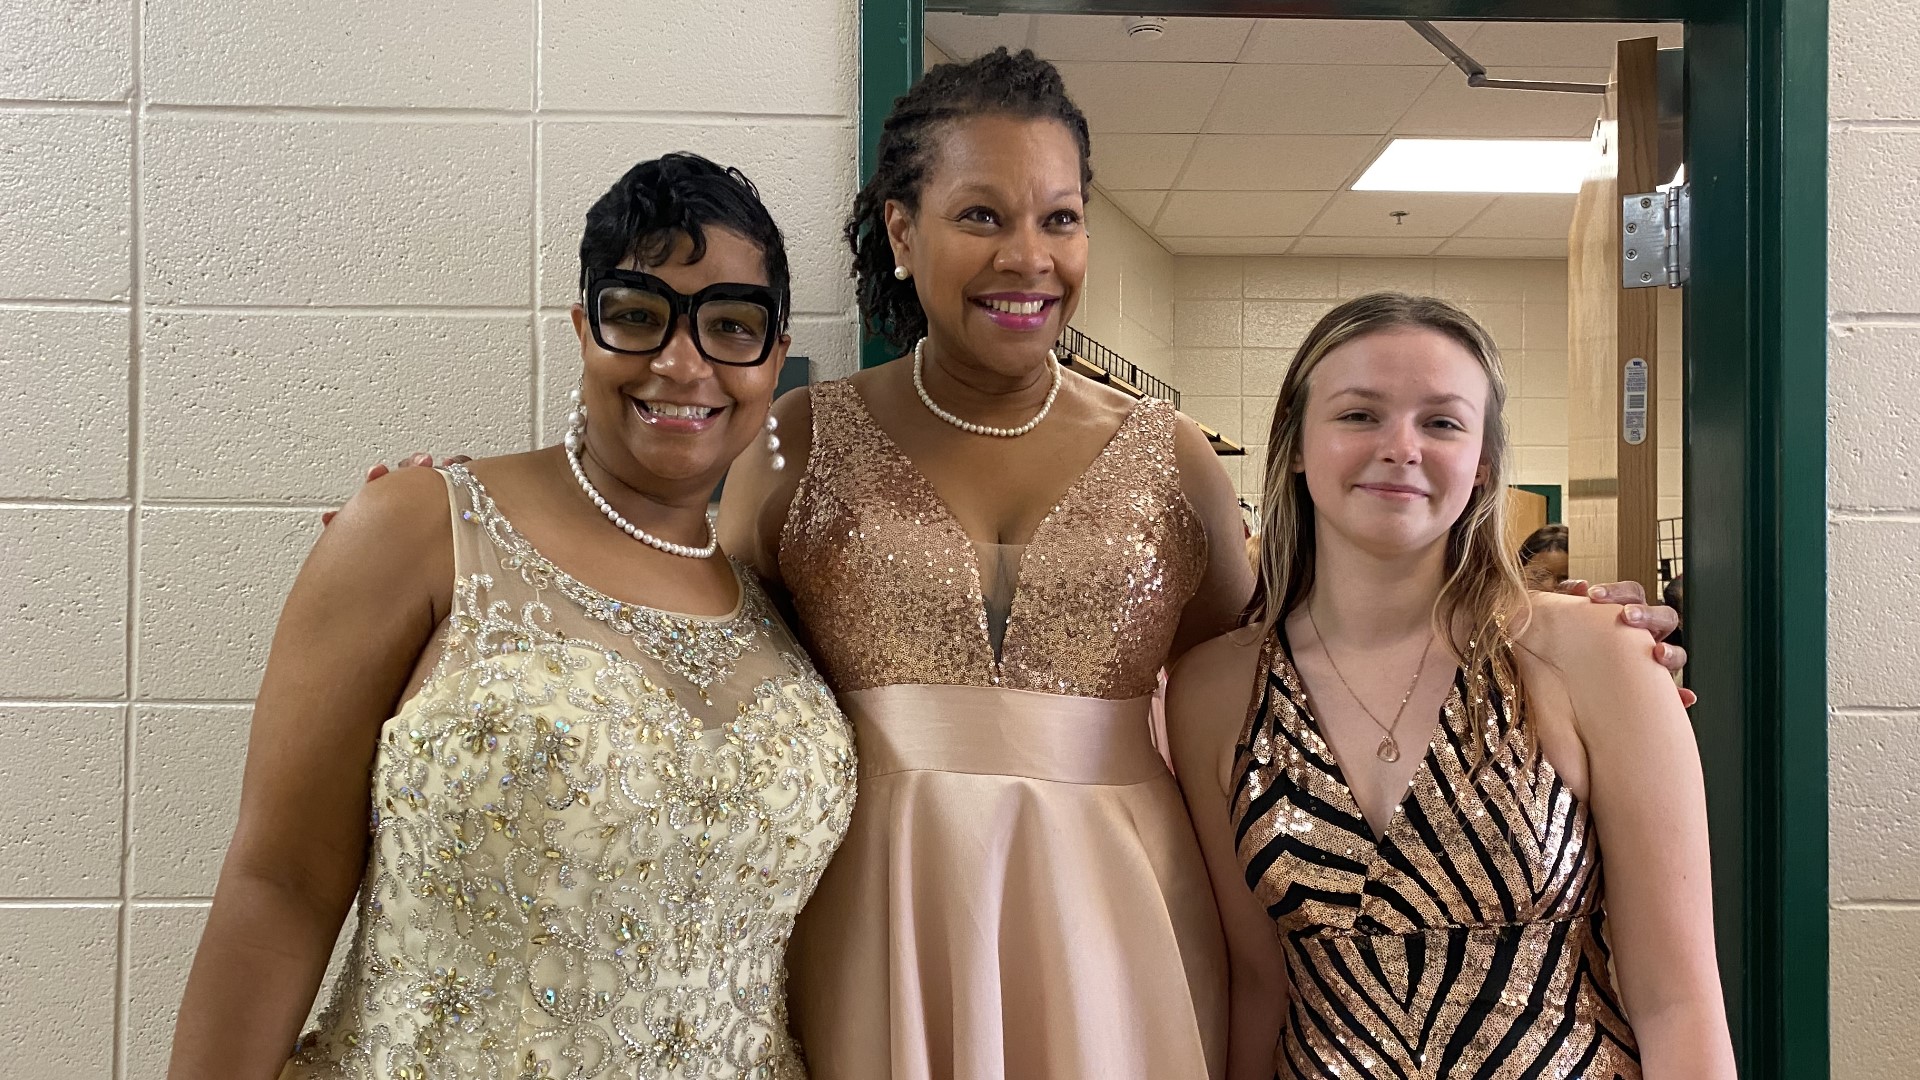 "We have some students who just cannot afford to go to the prom. That's why we came up with this idea to reach out to the community and say 'Hey, we need help'."